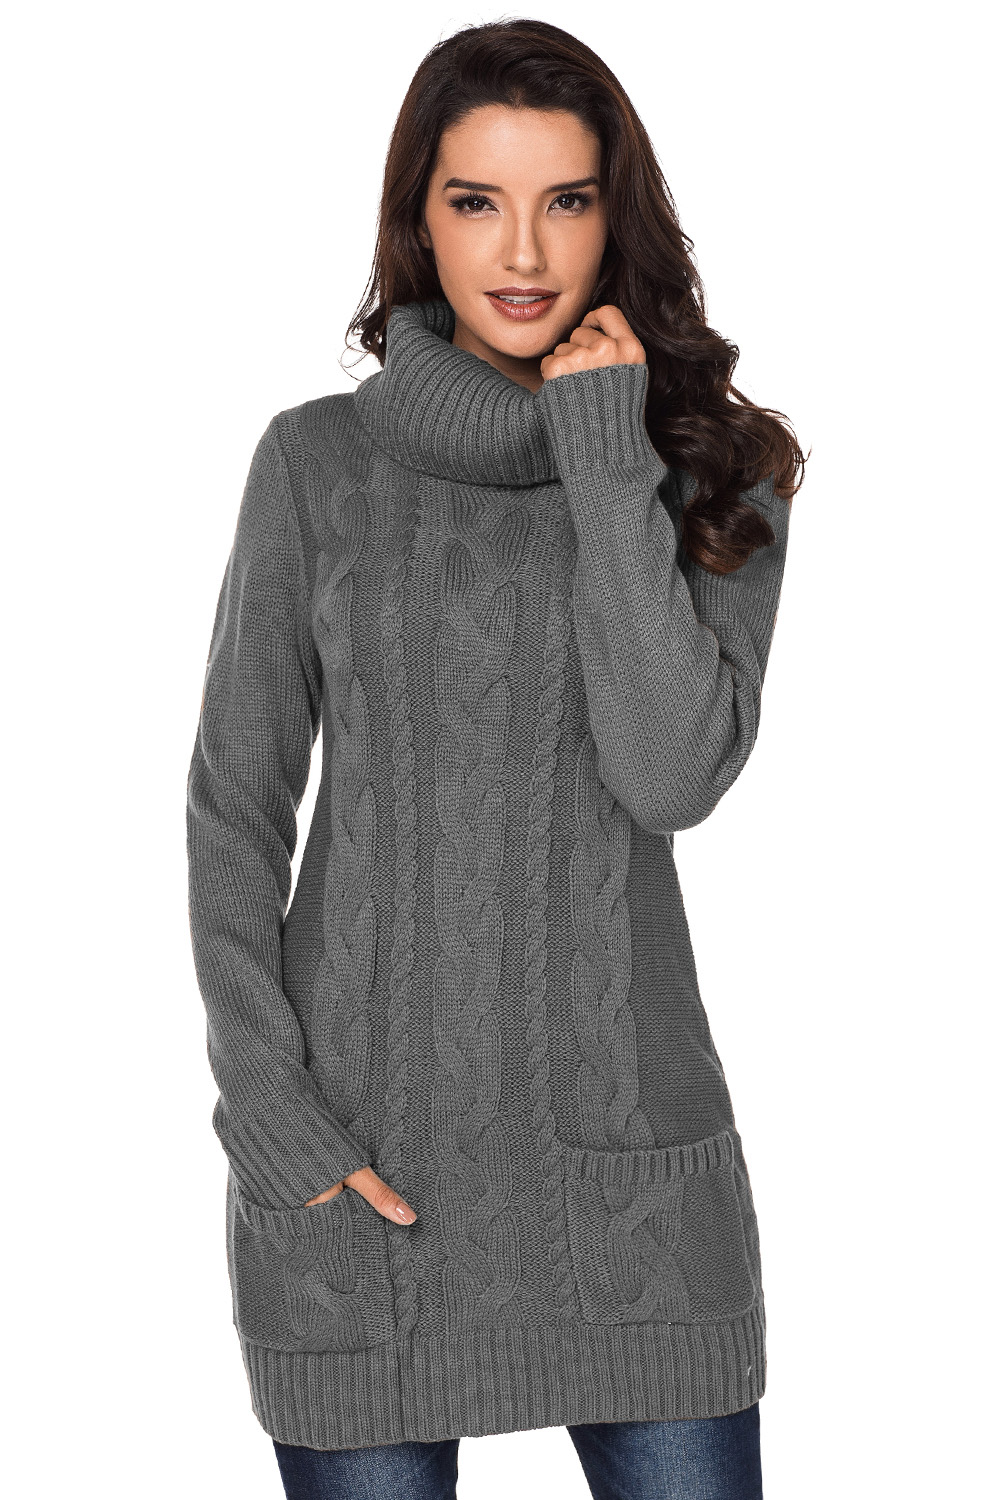 S cable knit sweater dress - Coldwater creek, best online stores ...